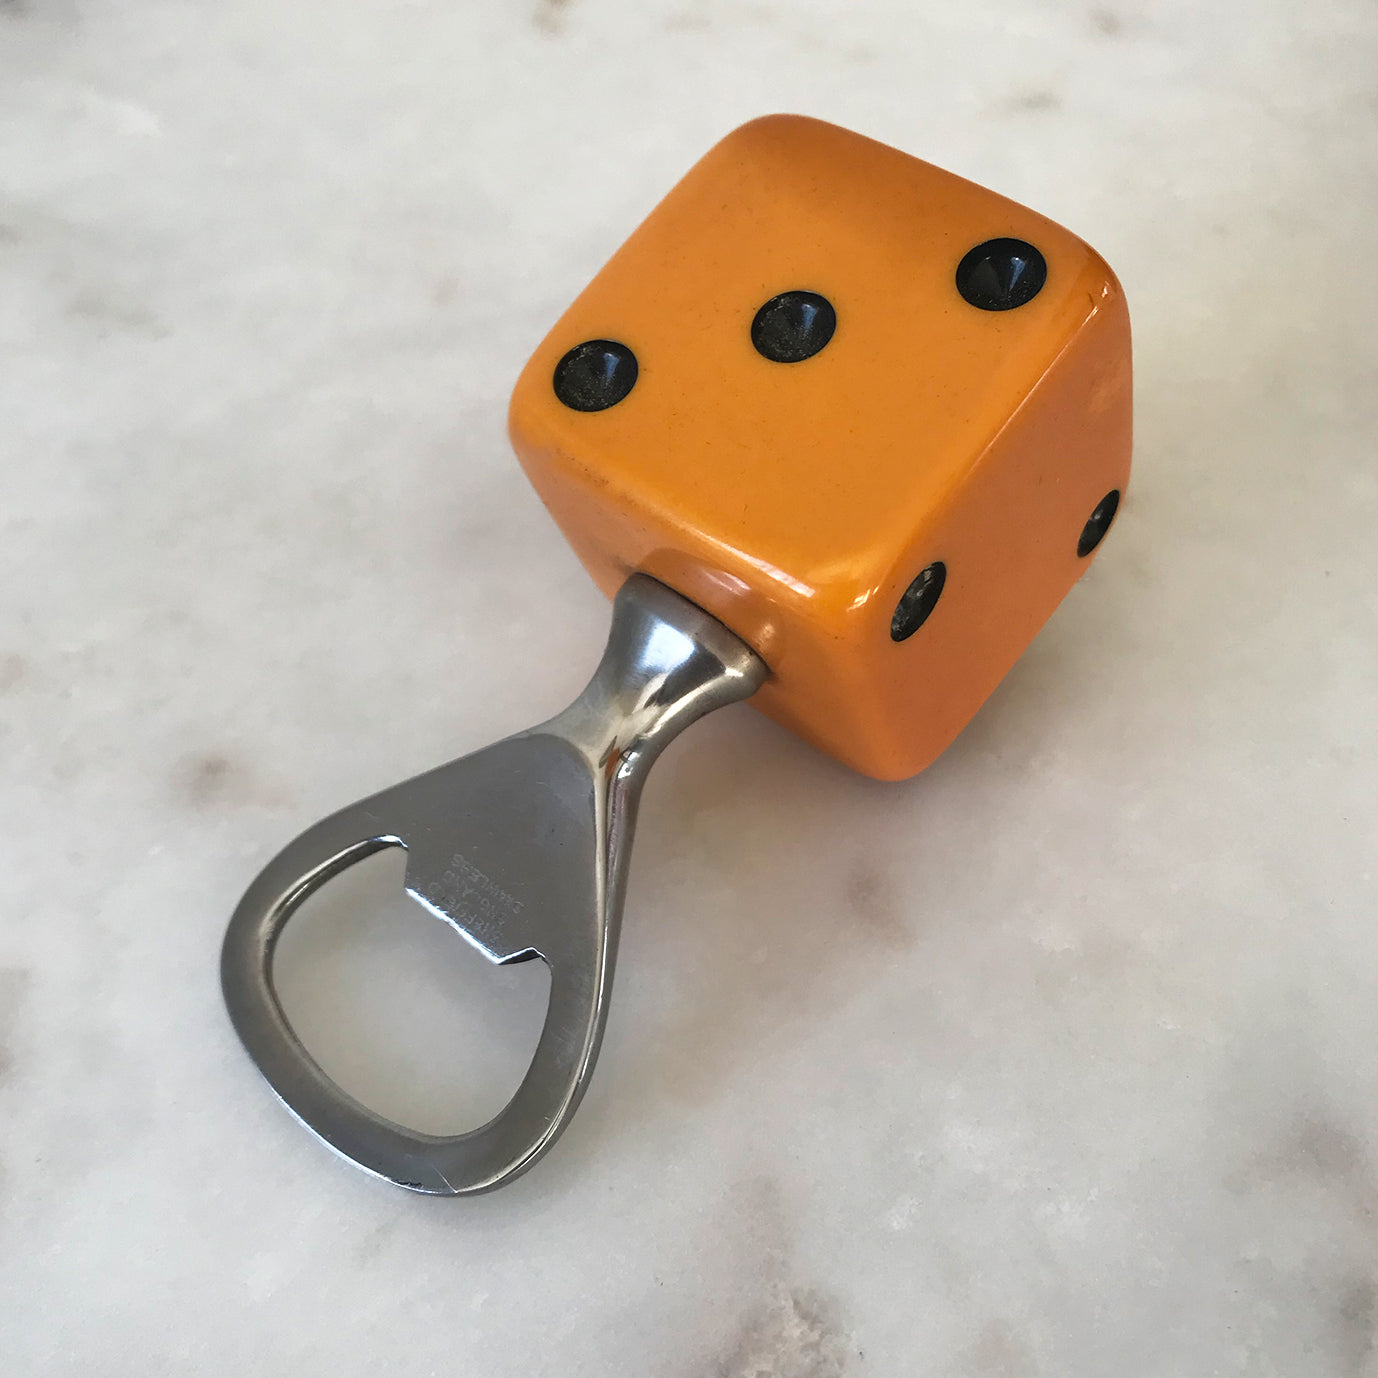 Three deep orange vintage dice all doing a job... One sits atop your bottle replacing the cork, pull off the dice and it becomes a pourer. The second dice is your corkscrew whilst the third dice opens your beer bottles - SHOP NOW - www.intovintage.co.uk